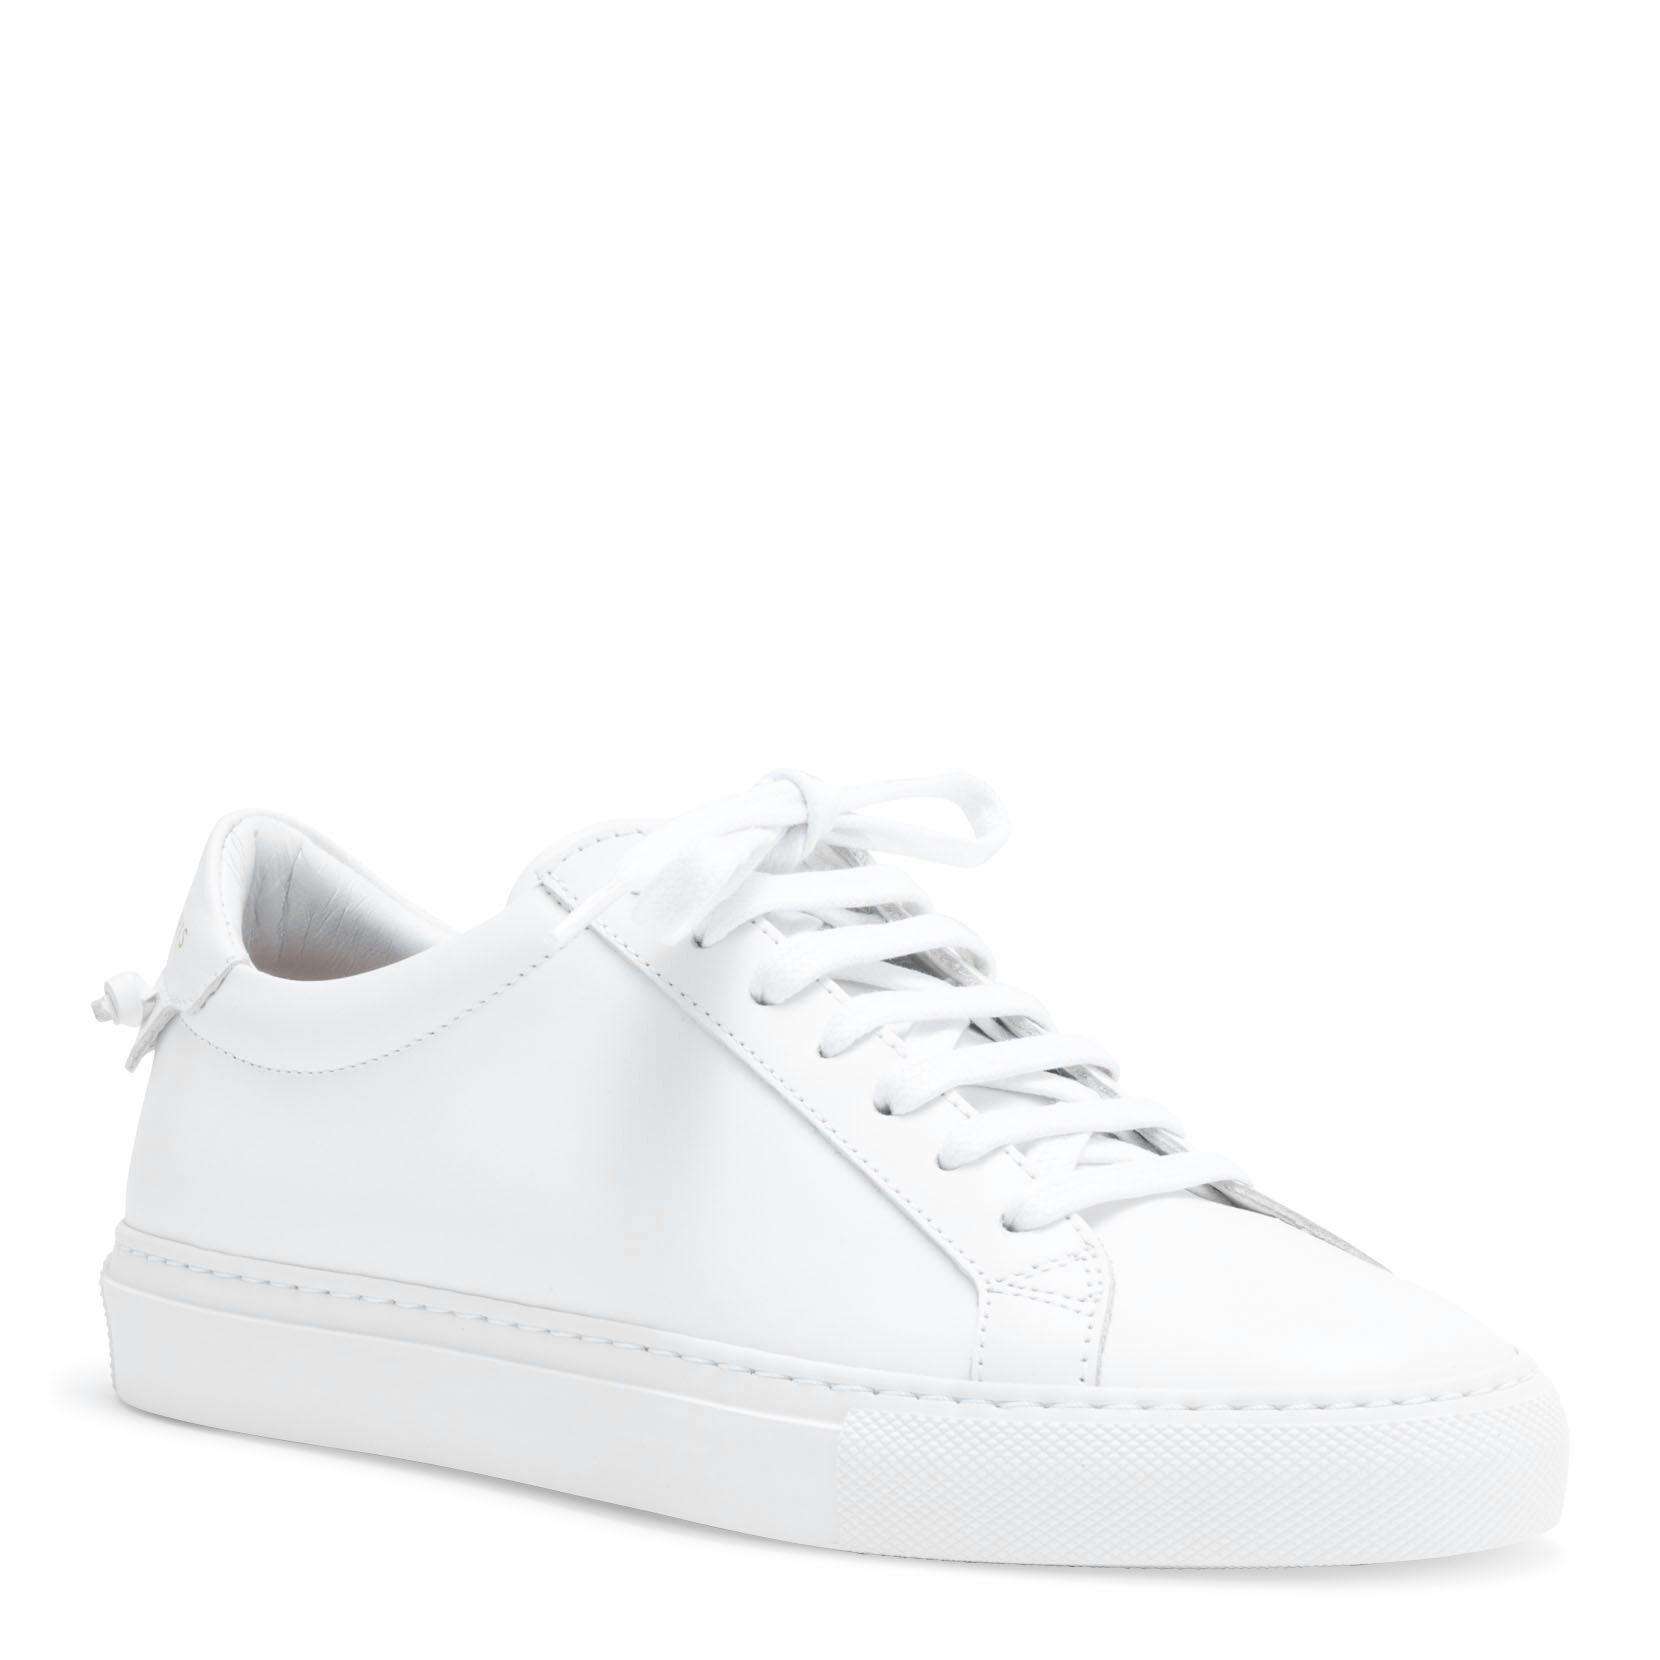 Givenchy Urban Street White Leather Sneakers